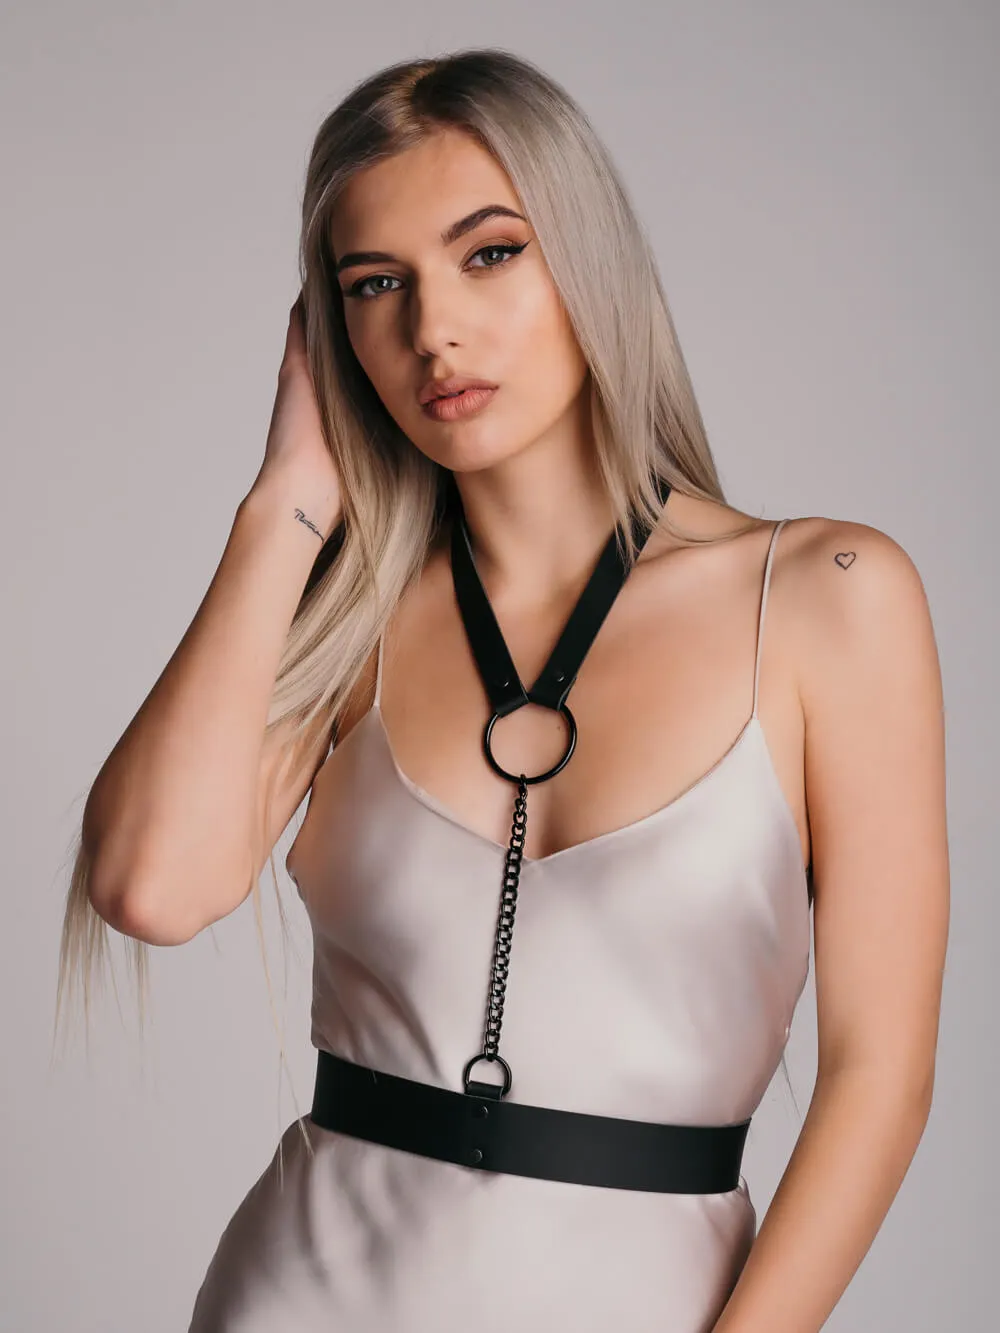 Brave leather harness accessory with choker with large black ring and black chain connected to belt.